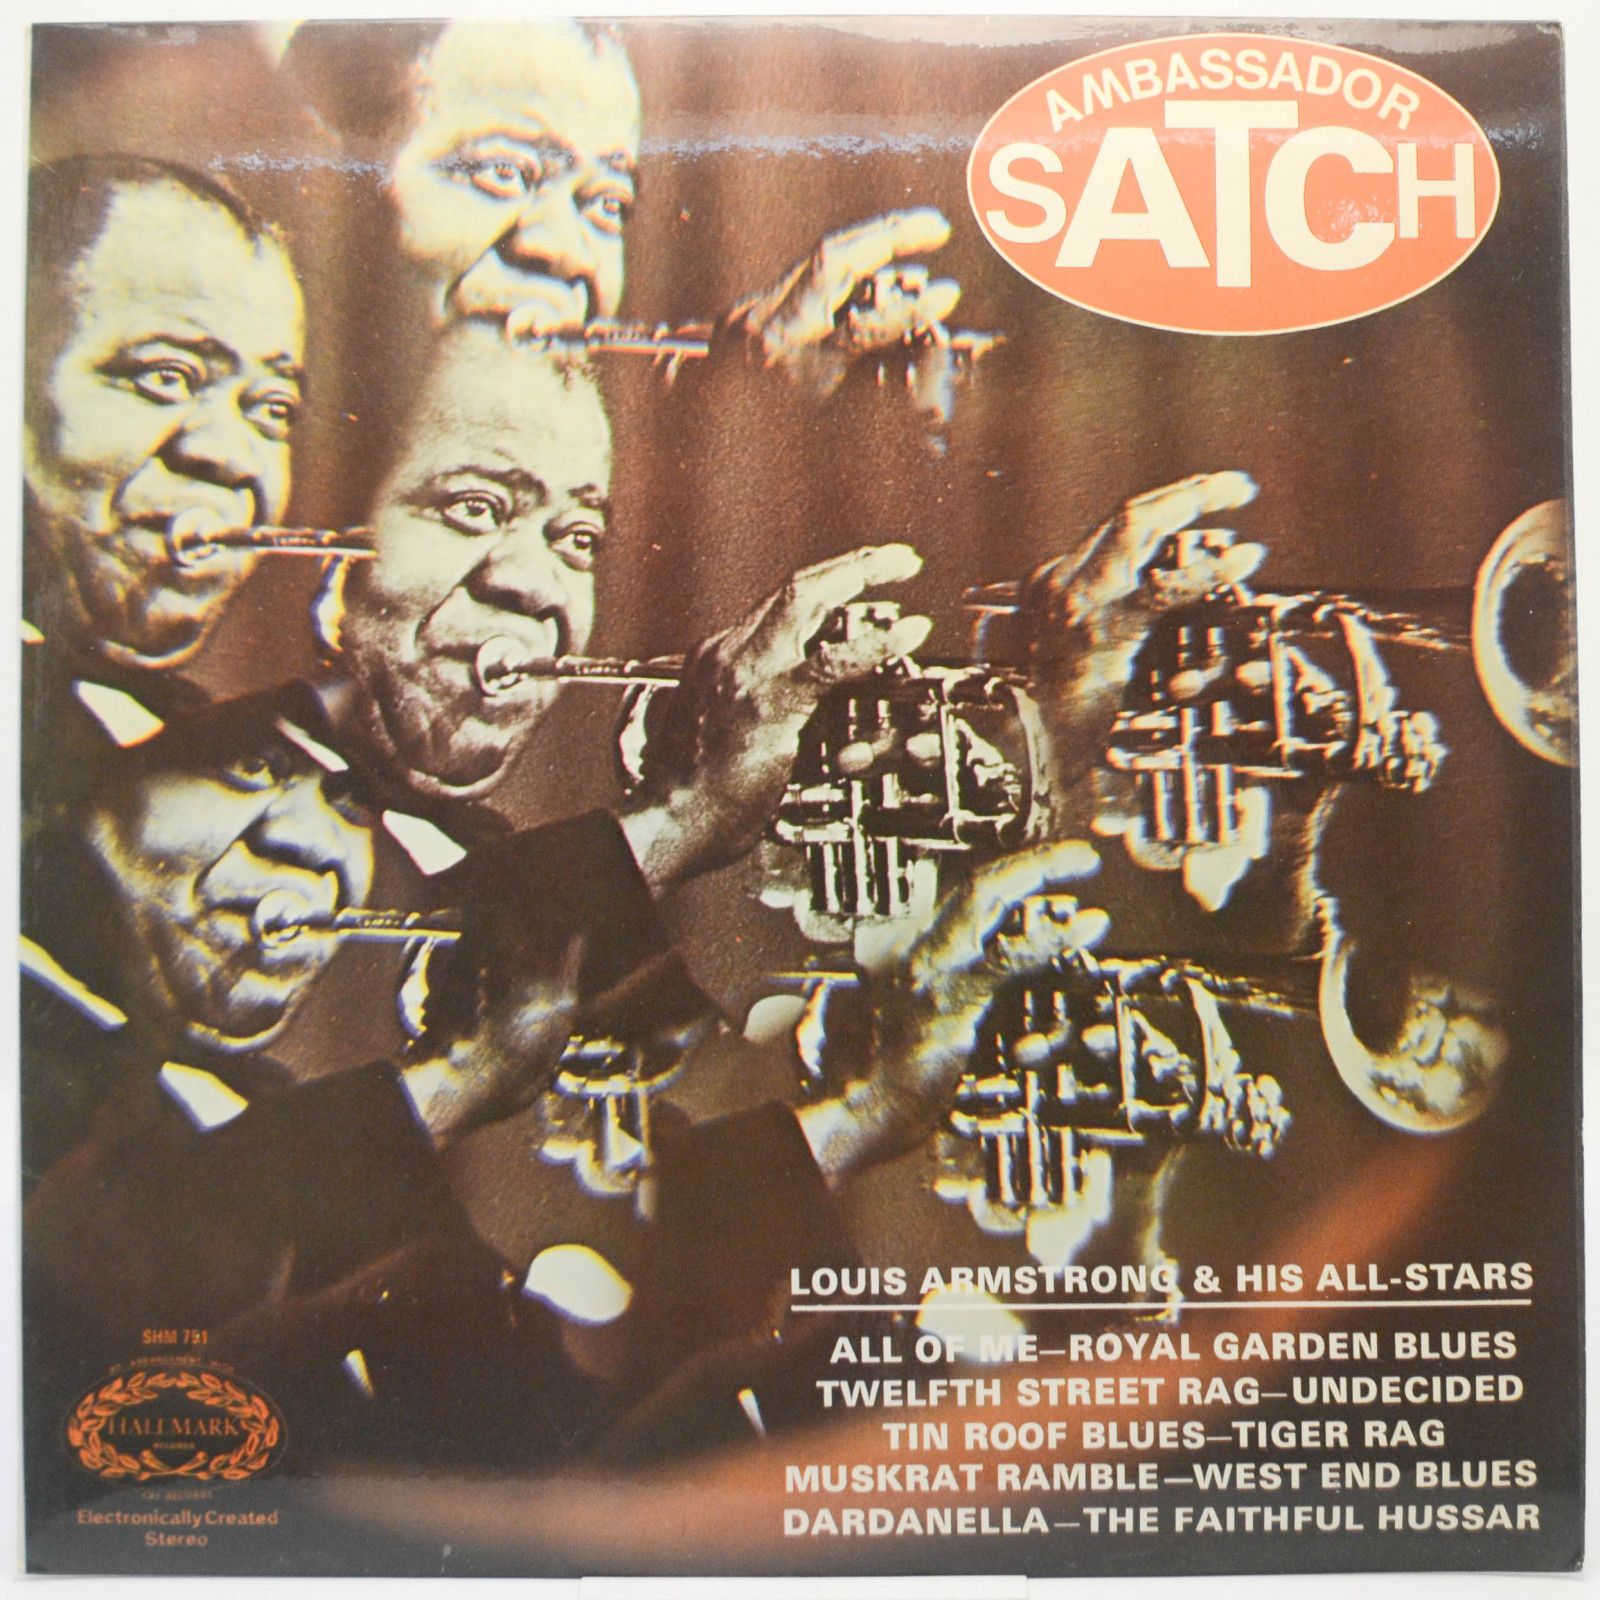 Louis Armstrong & His All-Stars — Ambassador Satch, 1971